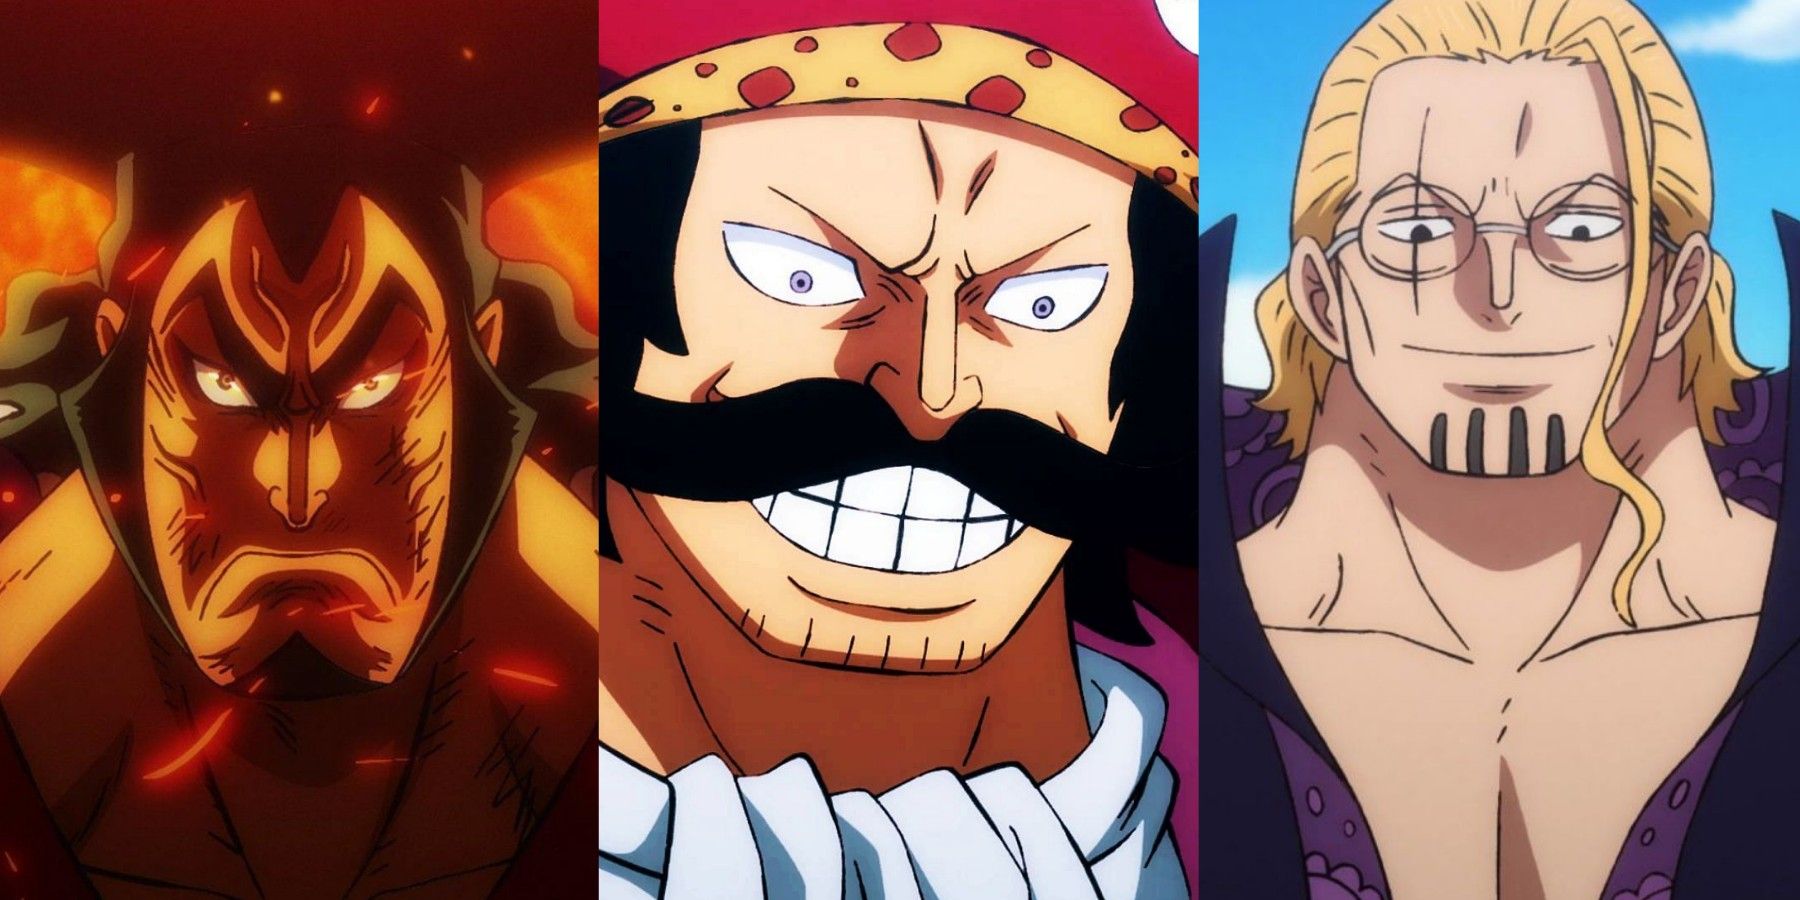 featured one piece every member of Roger pirates Rayleigh gaban roger